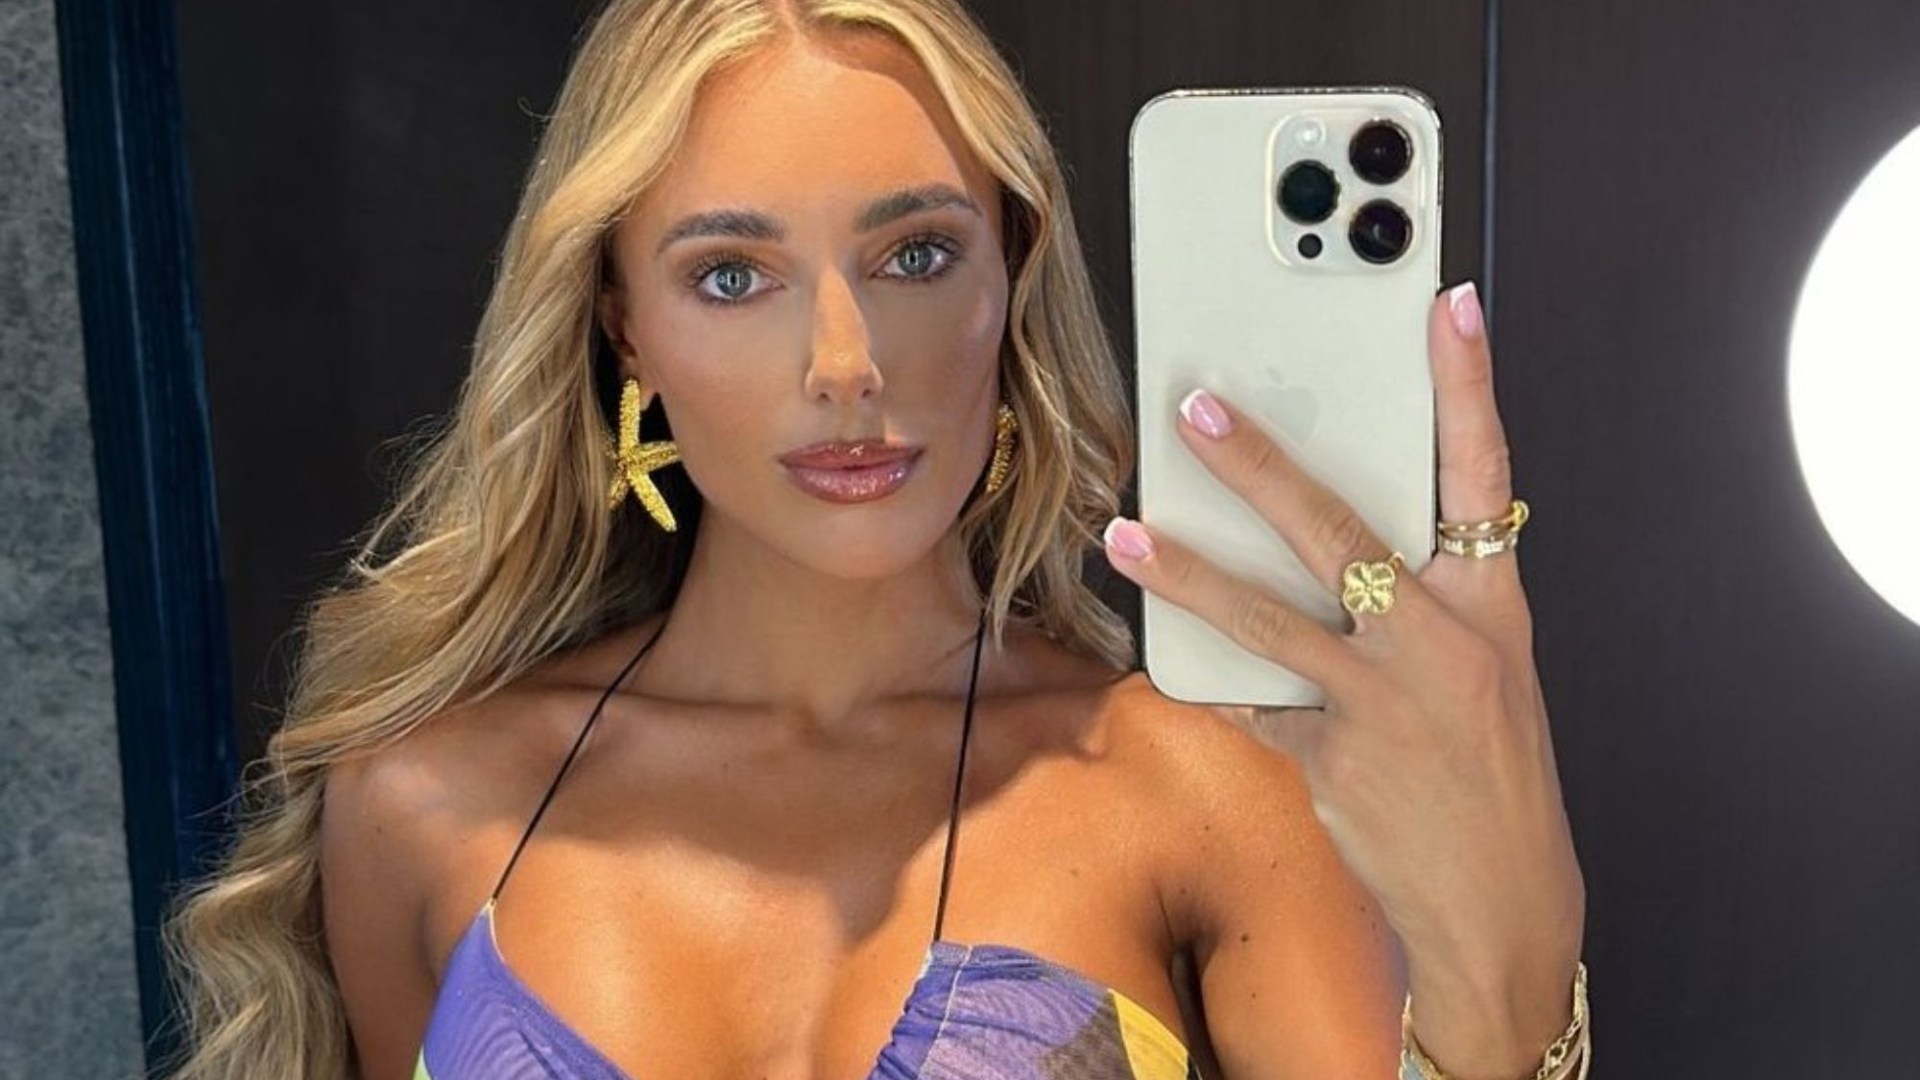 Towie’s Amber Turner turns up the heat in a tiny bikini as she shows off abs on Bali trip [Video]